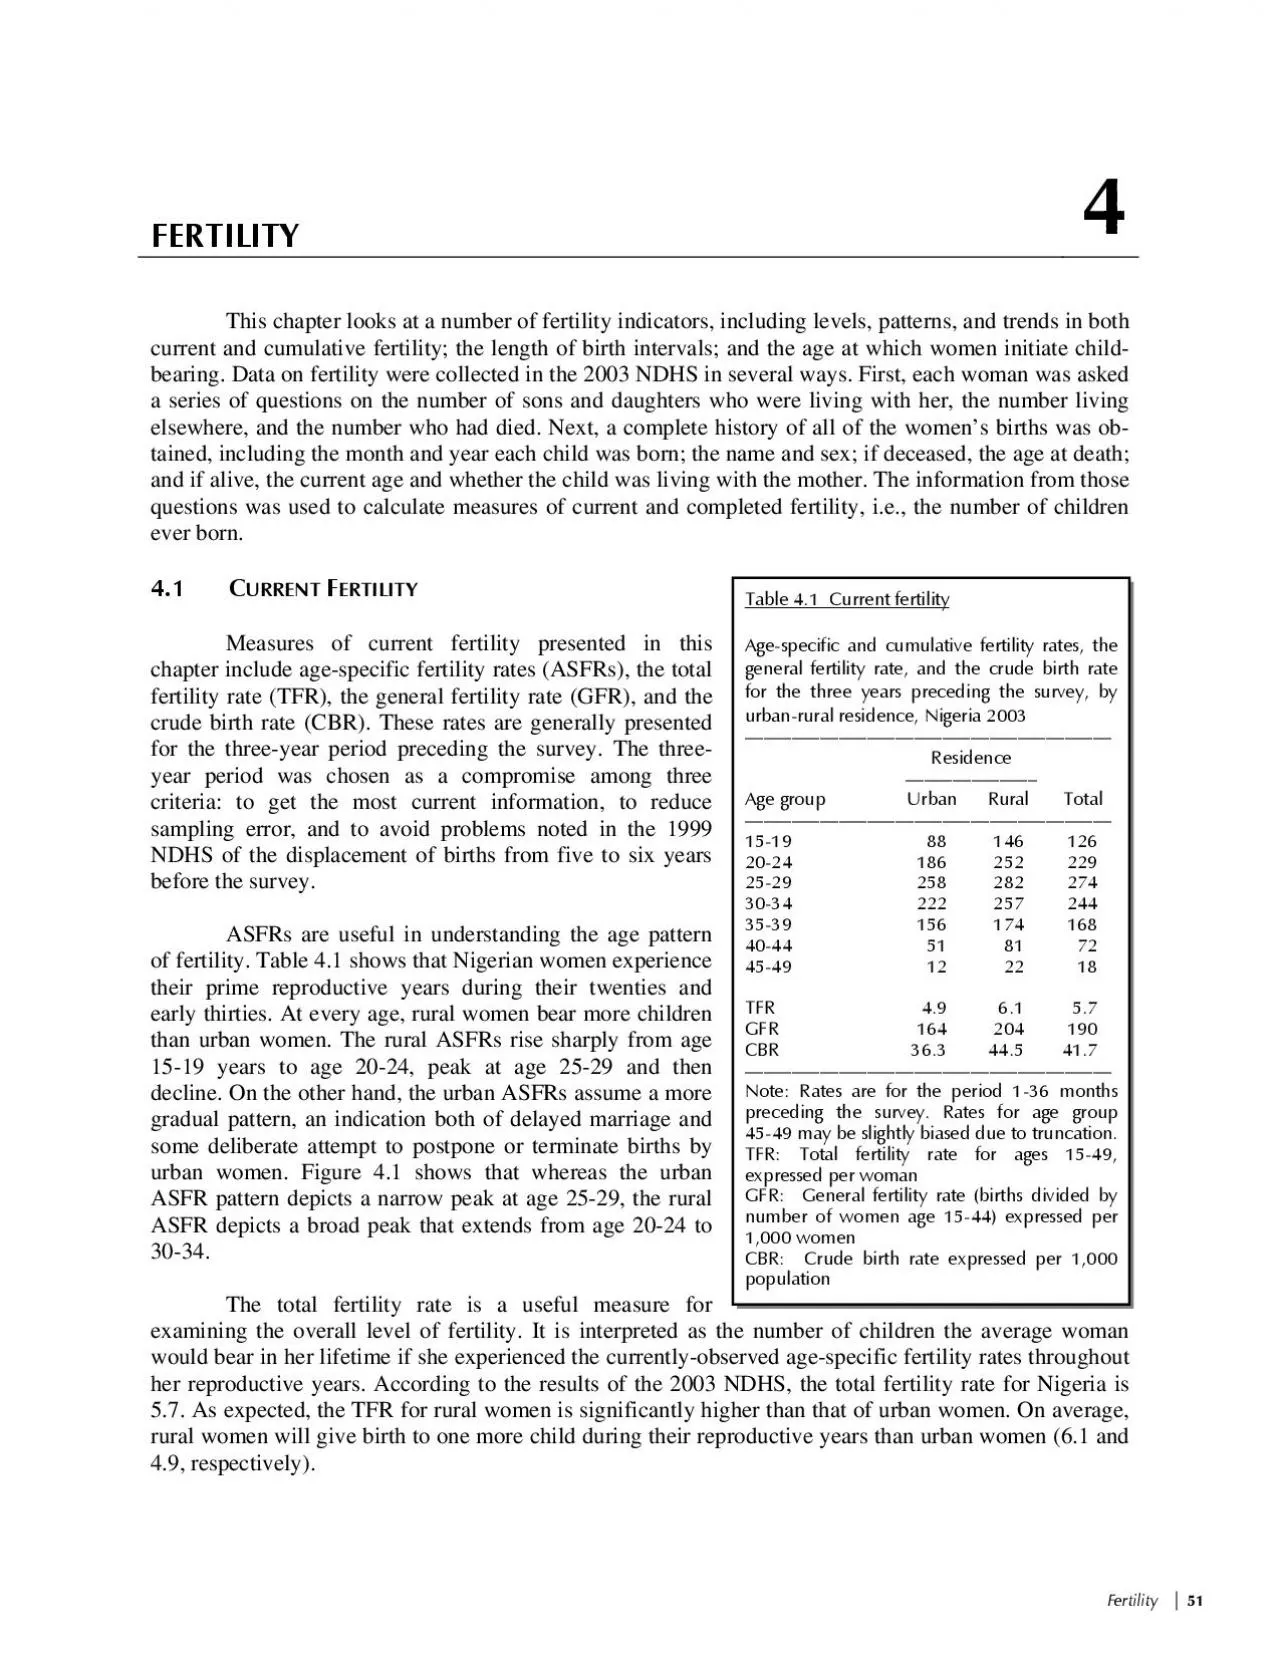 FertilityThe TFR of 57 computed in the 2003 NDHS is significantly hig